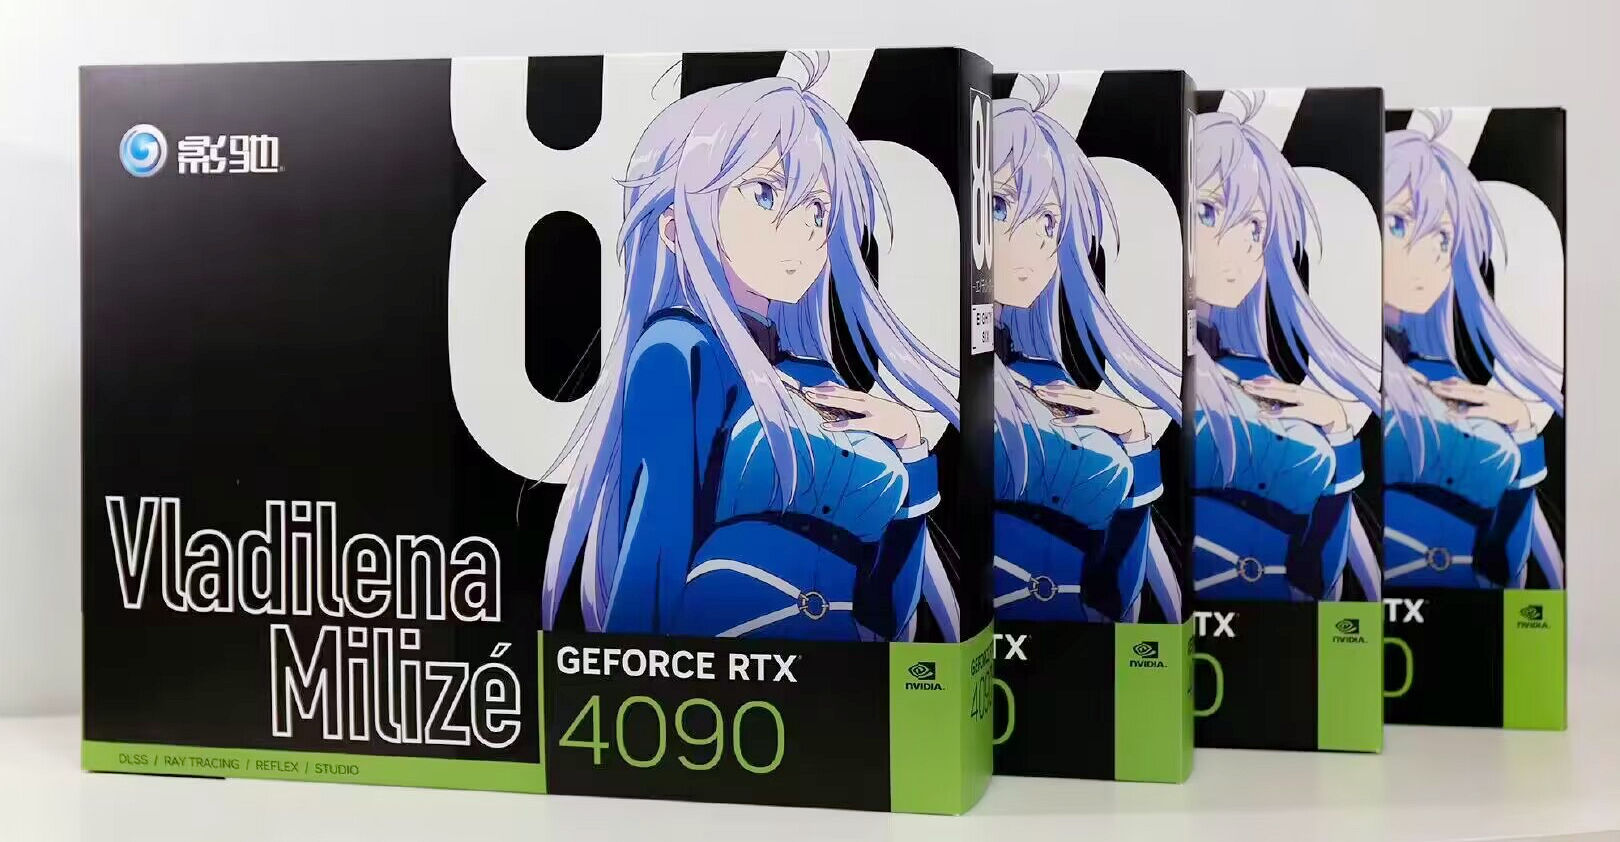 Sumi gives the RTX 3090 what do you do? : r/animememes